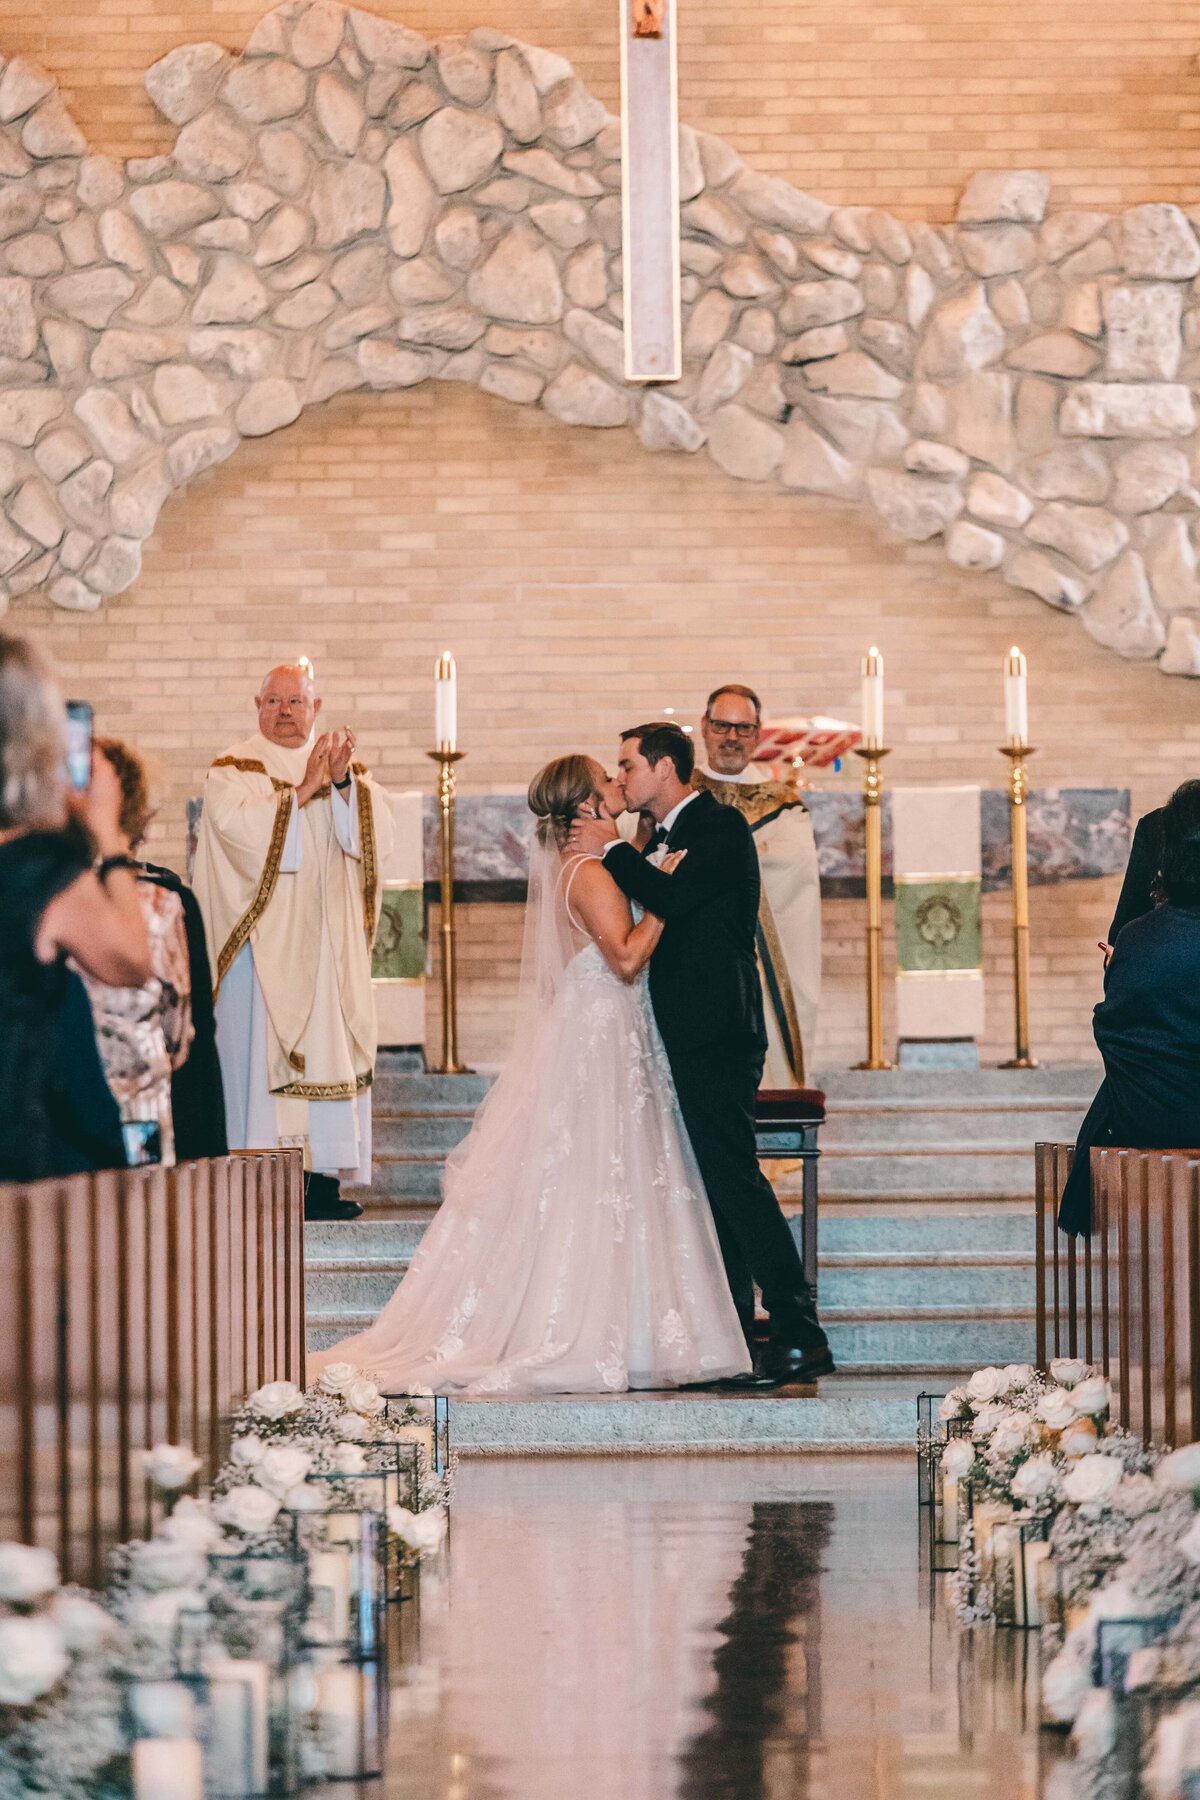 A bride and groom kissing at the altar of a church in Iowa, with a priest officiating and guests watching. The background features a large stone arch.